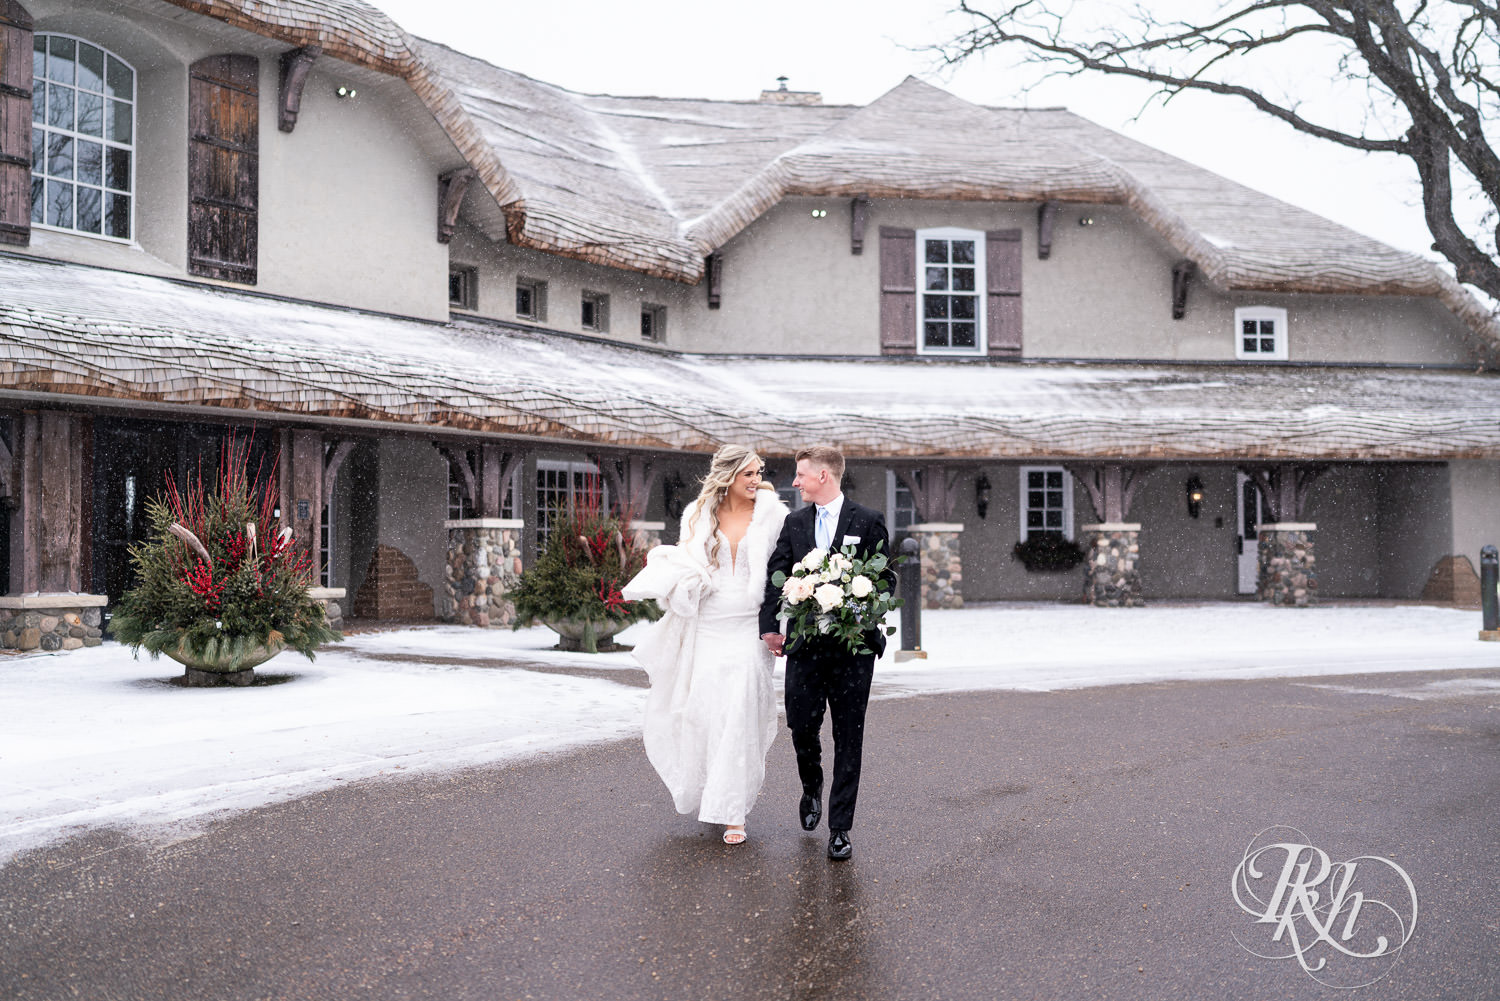 Bride and groom walk in the snow during winter wedding photography at Bavaria Downs in Chaska, Minnesota.